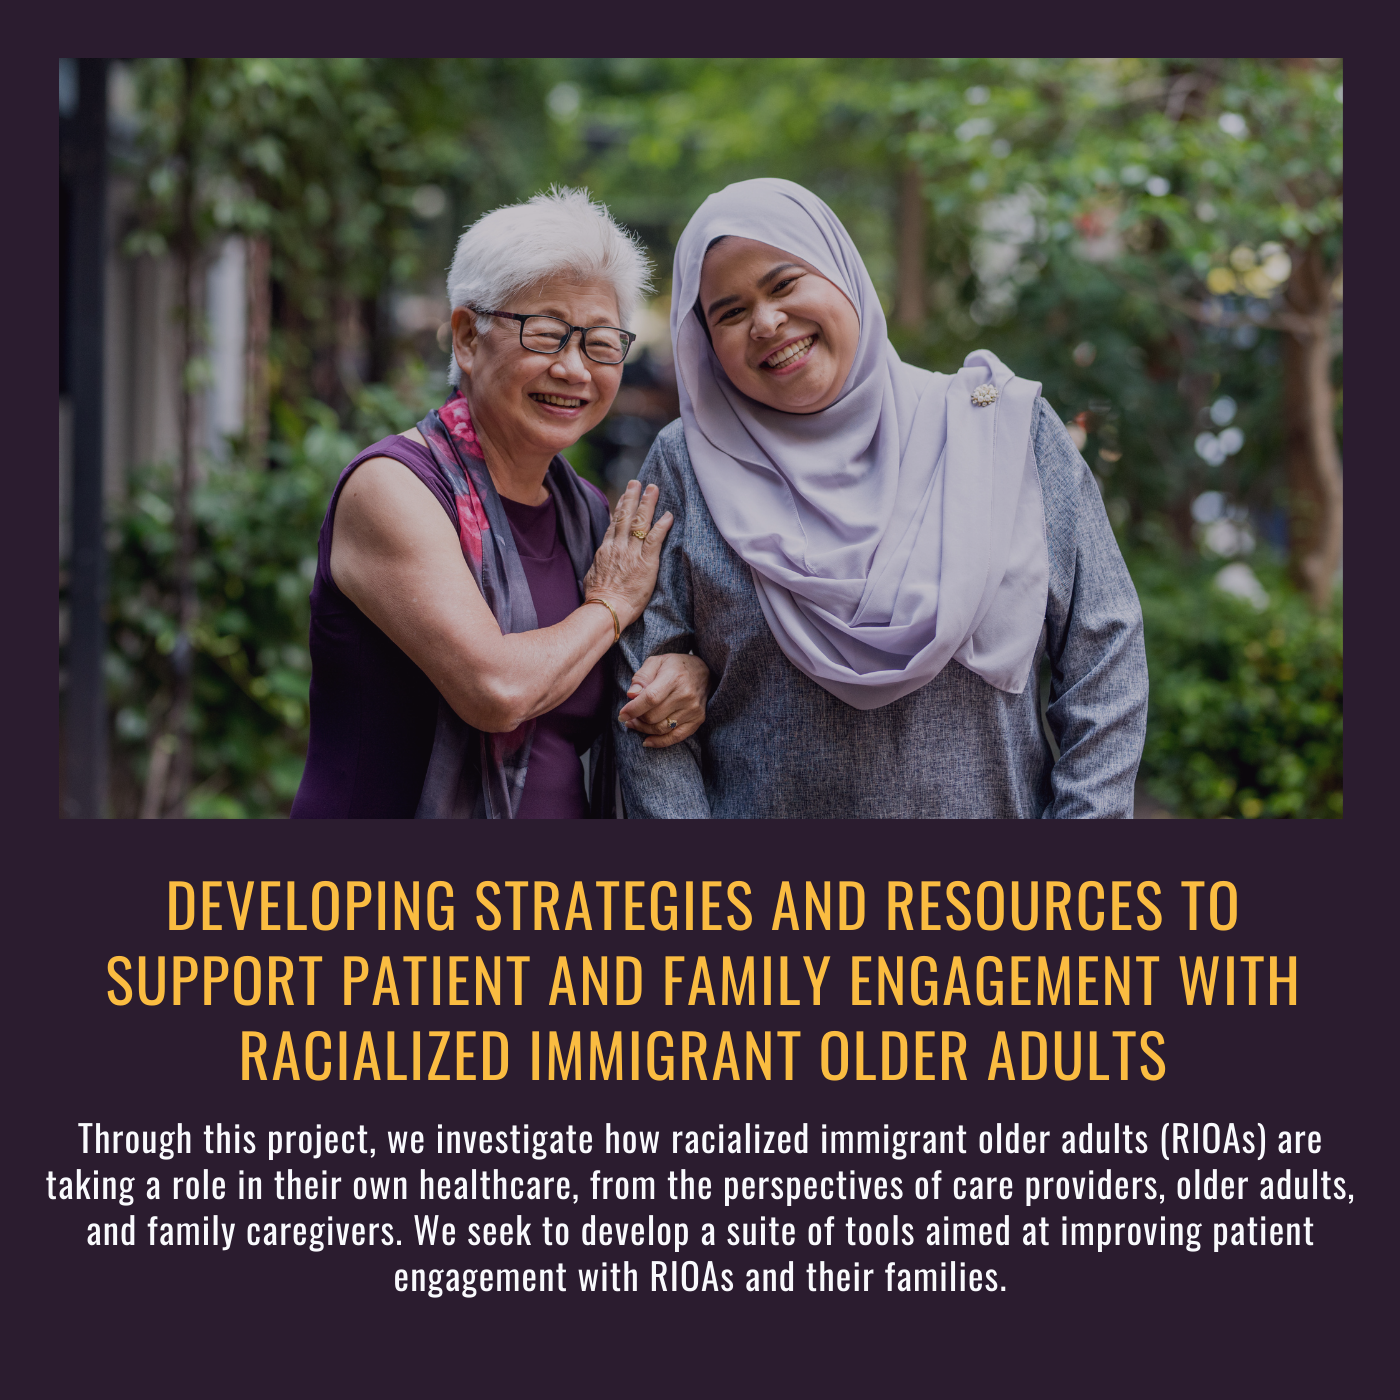 •	Developing strategies and resources to support patient and family engagement with racialized immigrant older adults. Through this project, we investigate how racialized immigrant older adults (RIOAs) are taking a role in their own healthcare, from the perspectives of care providers, older adults, and family caregivers. We seek to develop a suite of tools aimed at improving patient engagement with RIOAs and their families. Picture of an older woman linking arms with a younger woman in a hijab outside